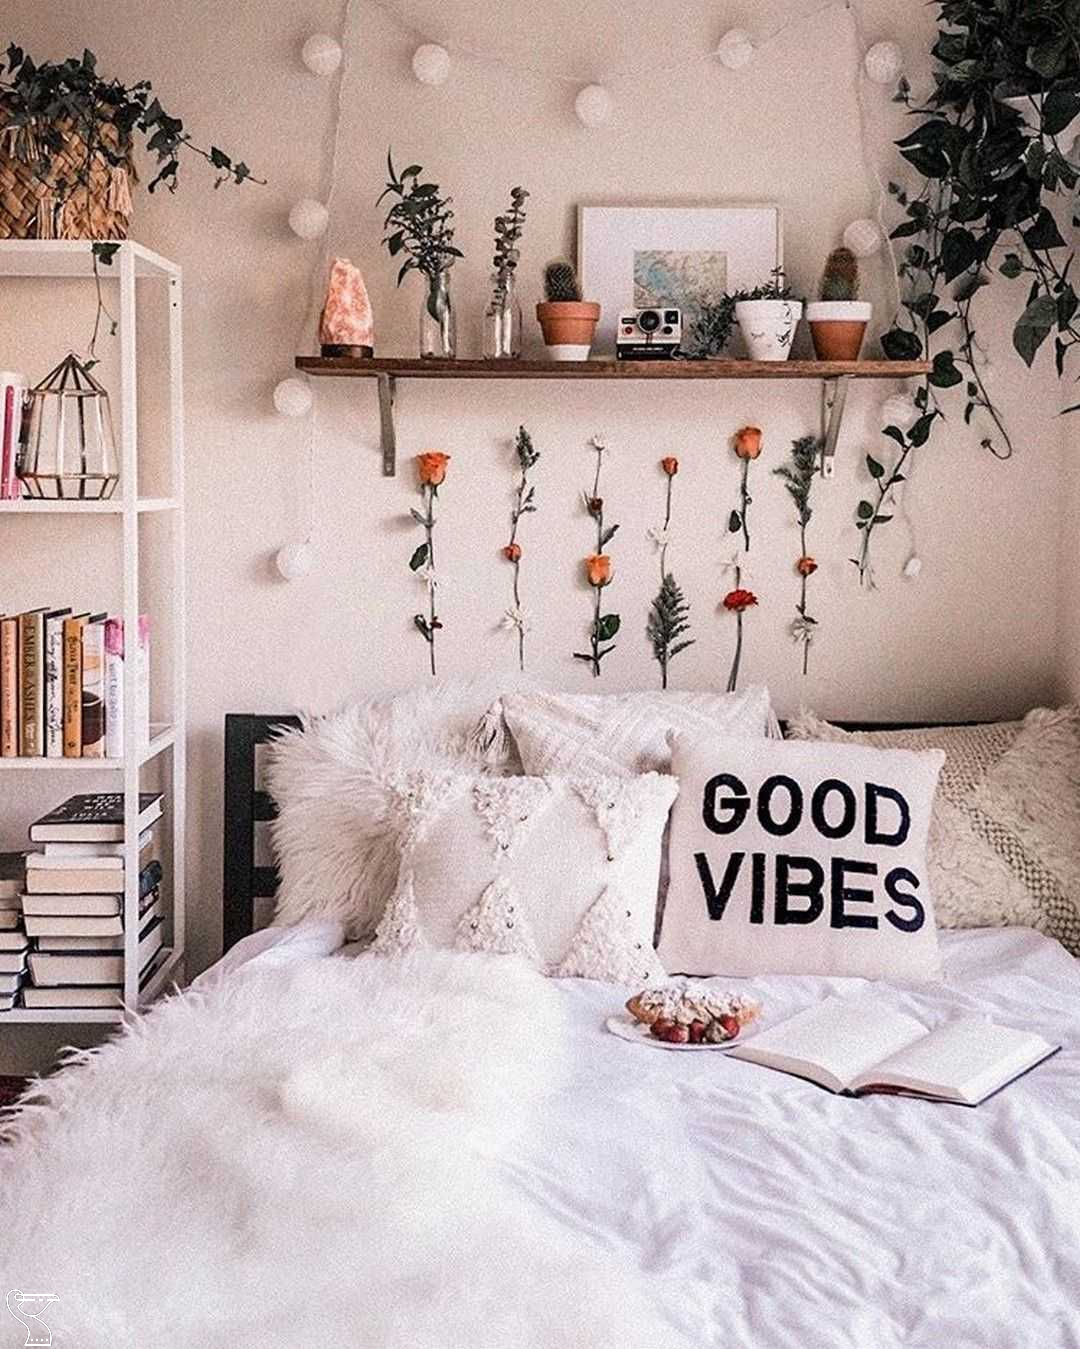 23 Cute Dorm Room Decor Ideas On This Page That We Just Love - 23 Cute Dorm Room Decor Ideas On This Page That We Just Love -   11 beauty Aesthetic room ideas